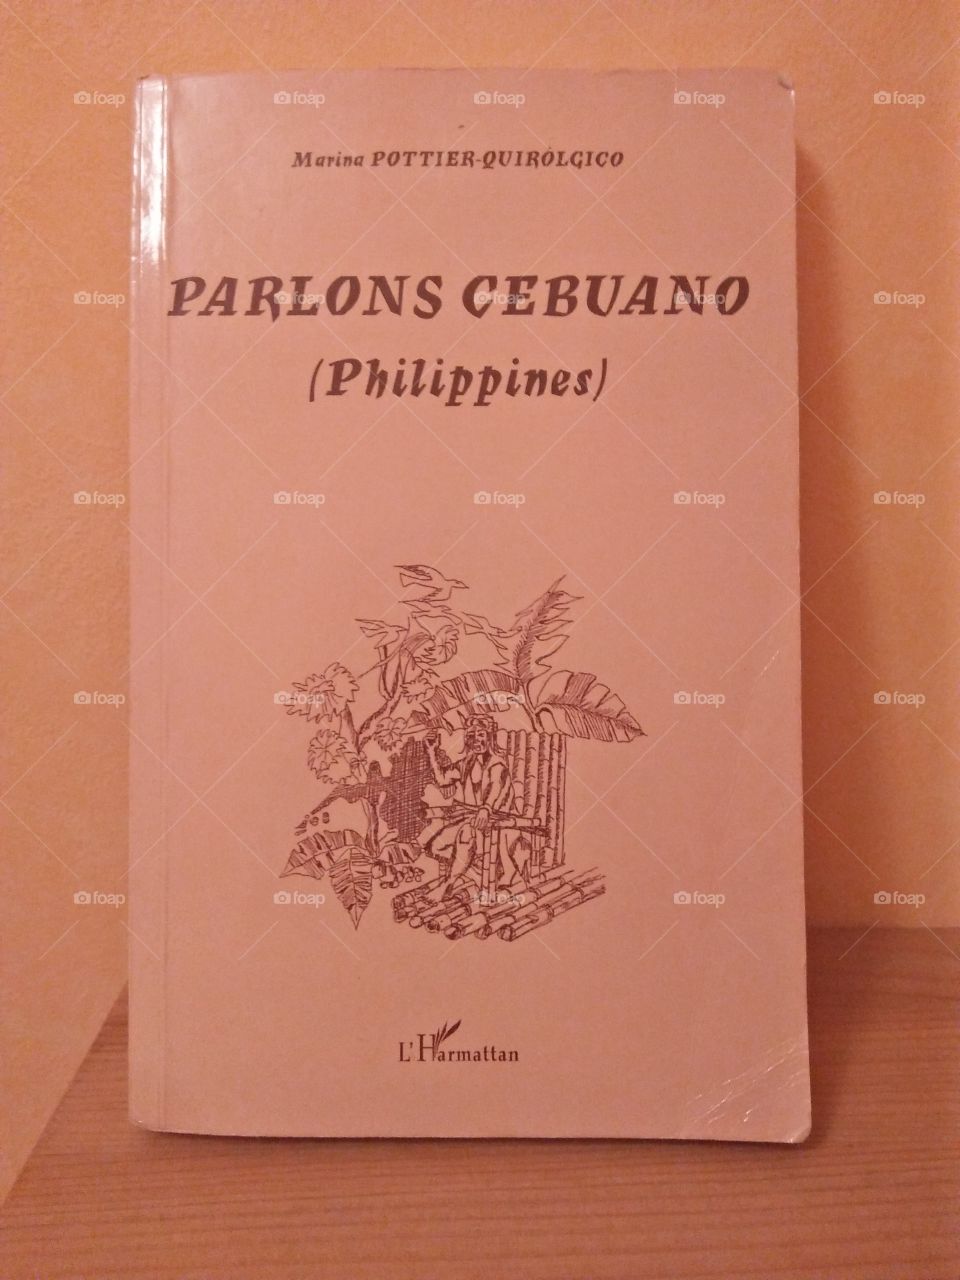 cebuano to french book translation